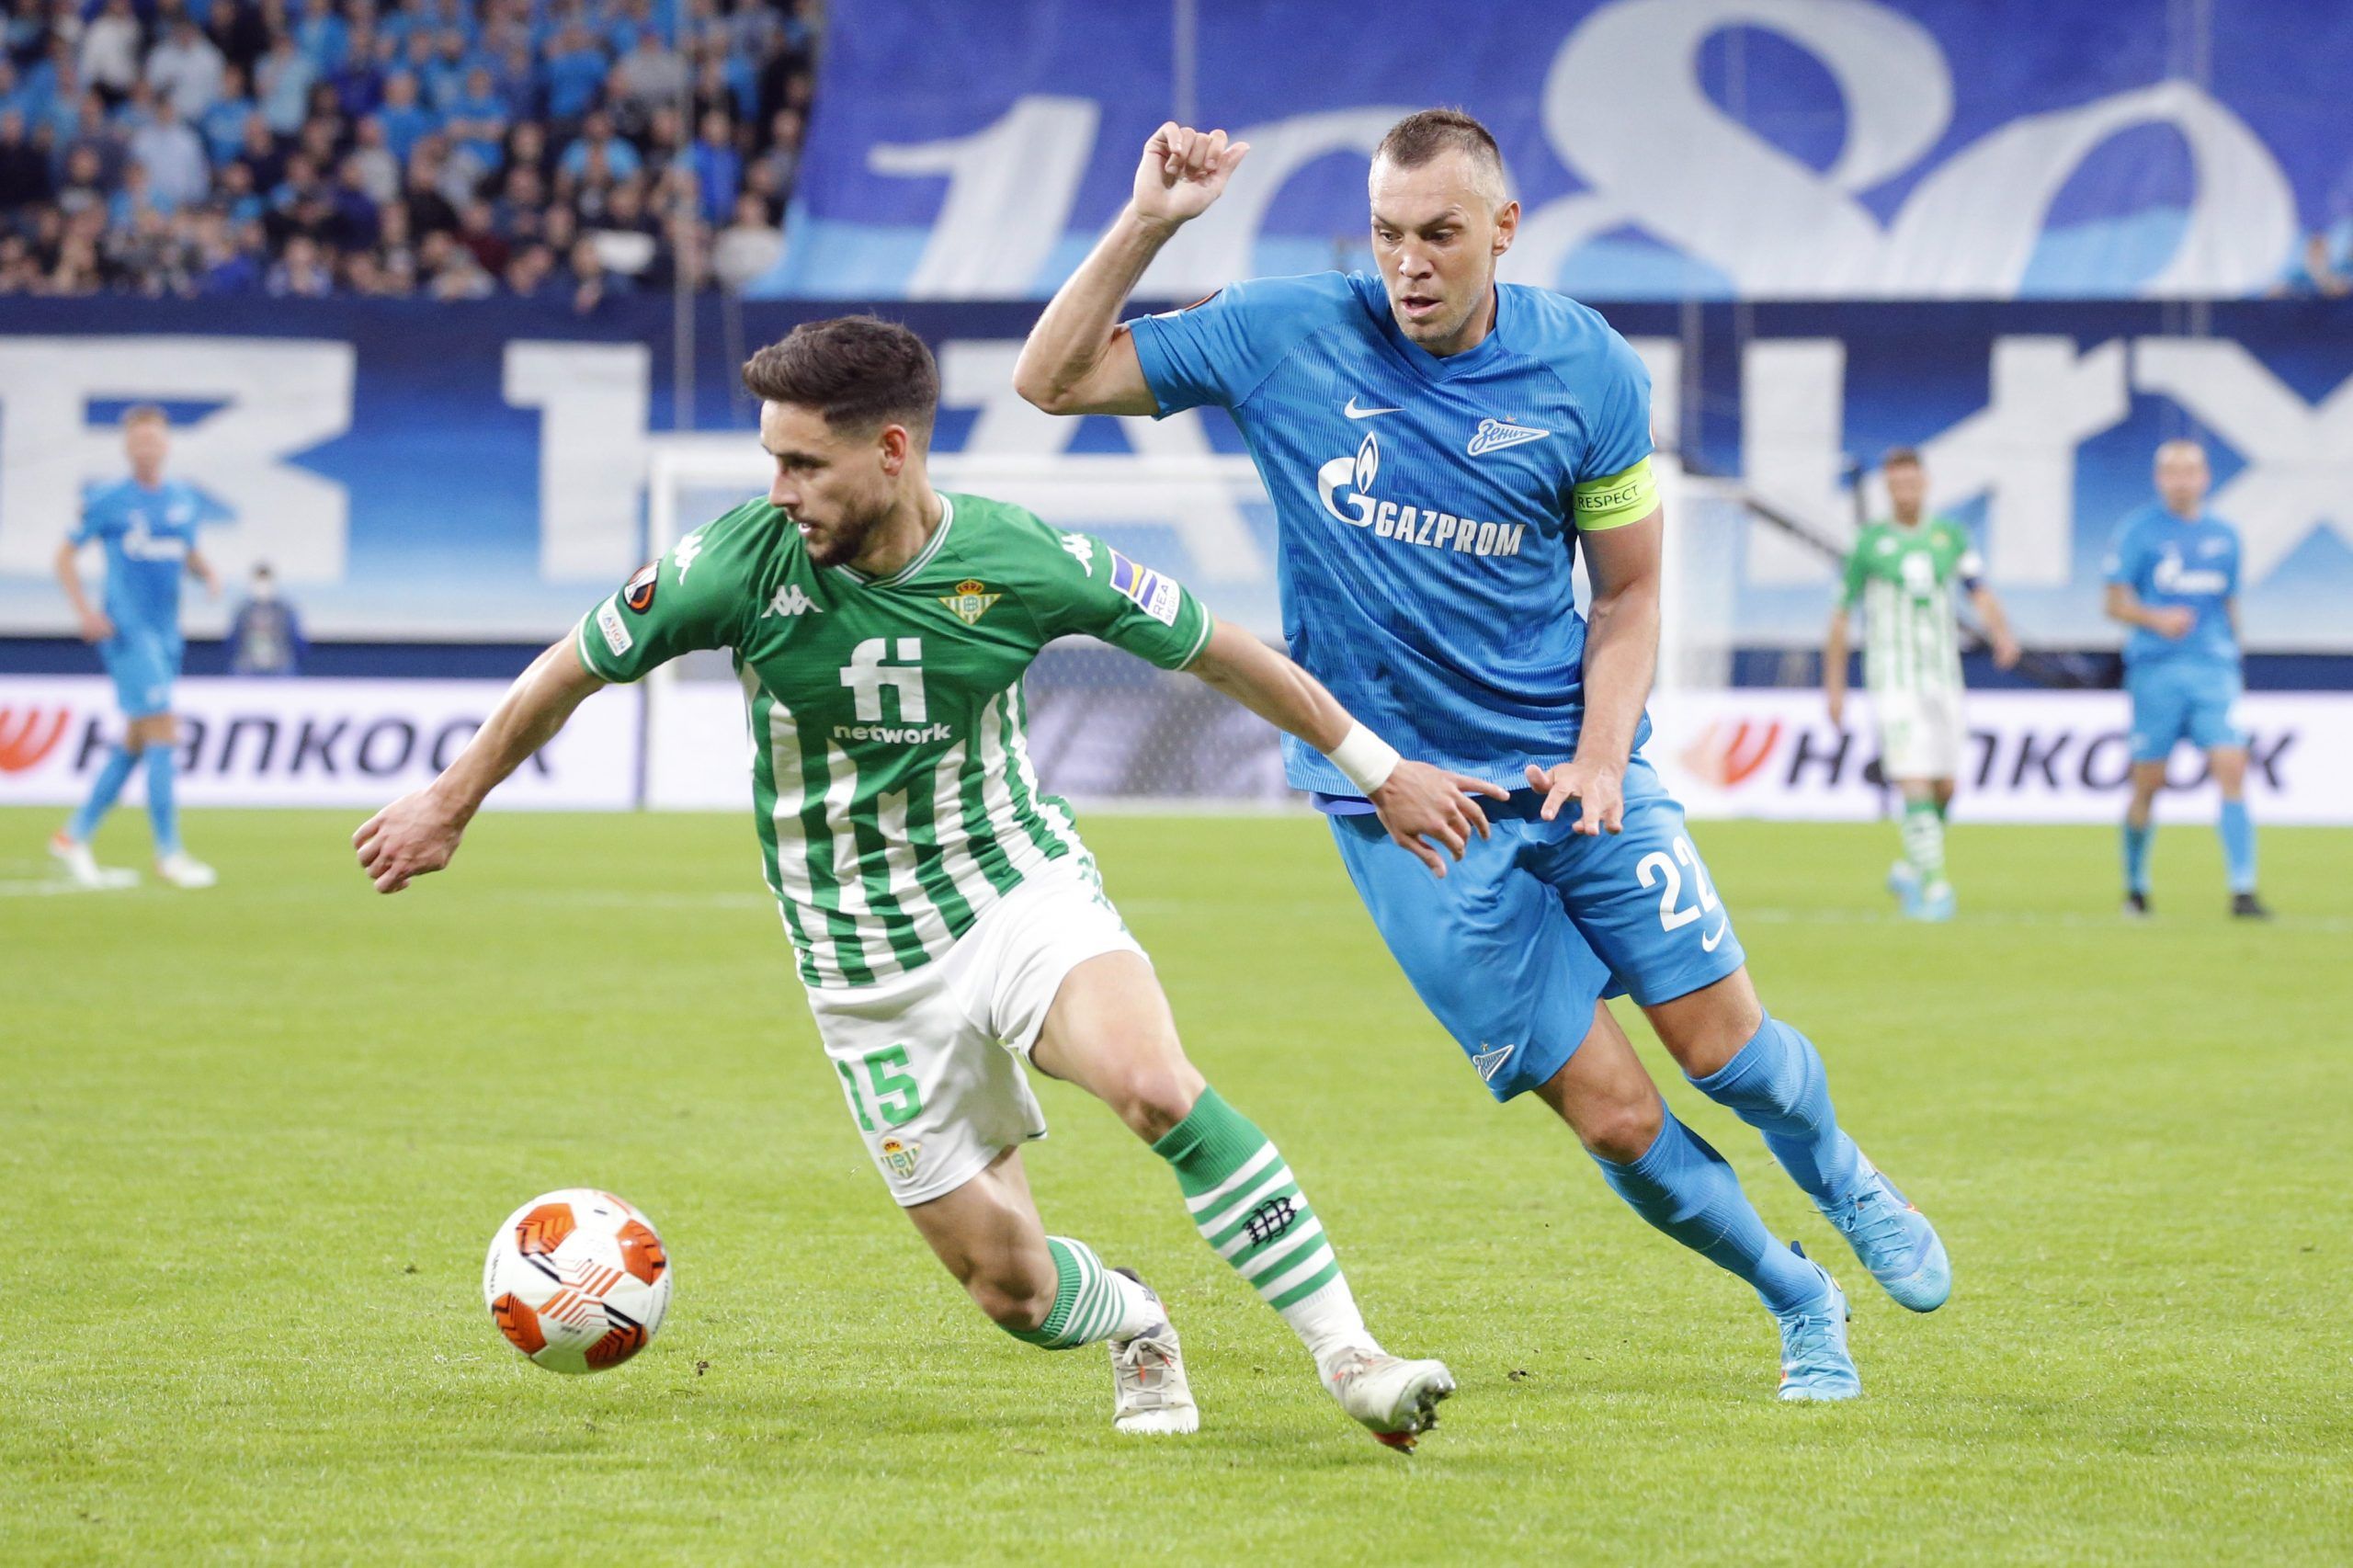 Soccer Football - Europa League - Play Off First Leg - Zenit St Petersburg v Real Betis - Gazprom Arena, Saint Petersburg, Russia - February 17, 2022 Zenit St Petersburg's Artem Dzyuba in action with Real Betis' Alex Moreno REUTERS/Anton Vaganov